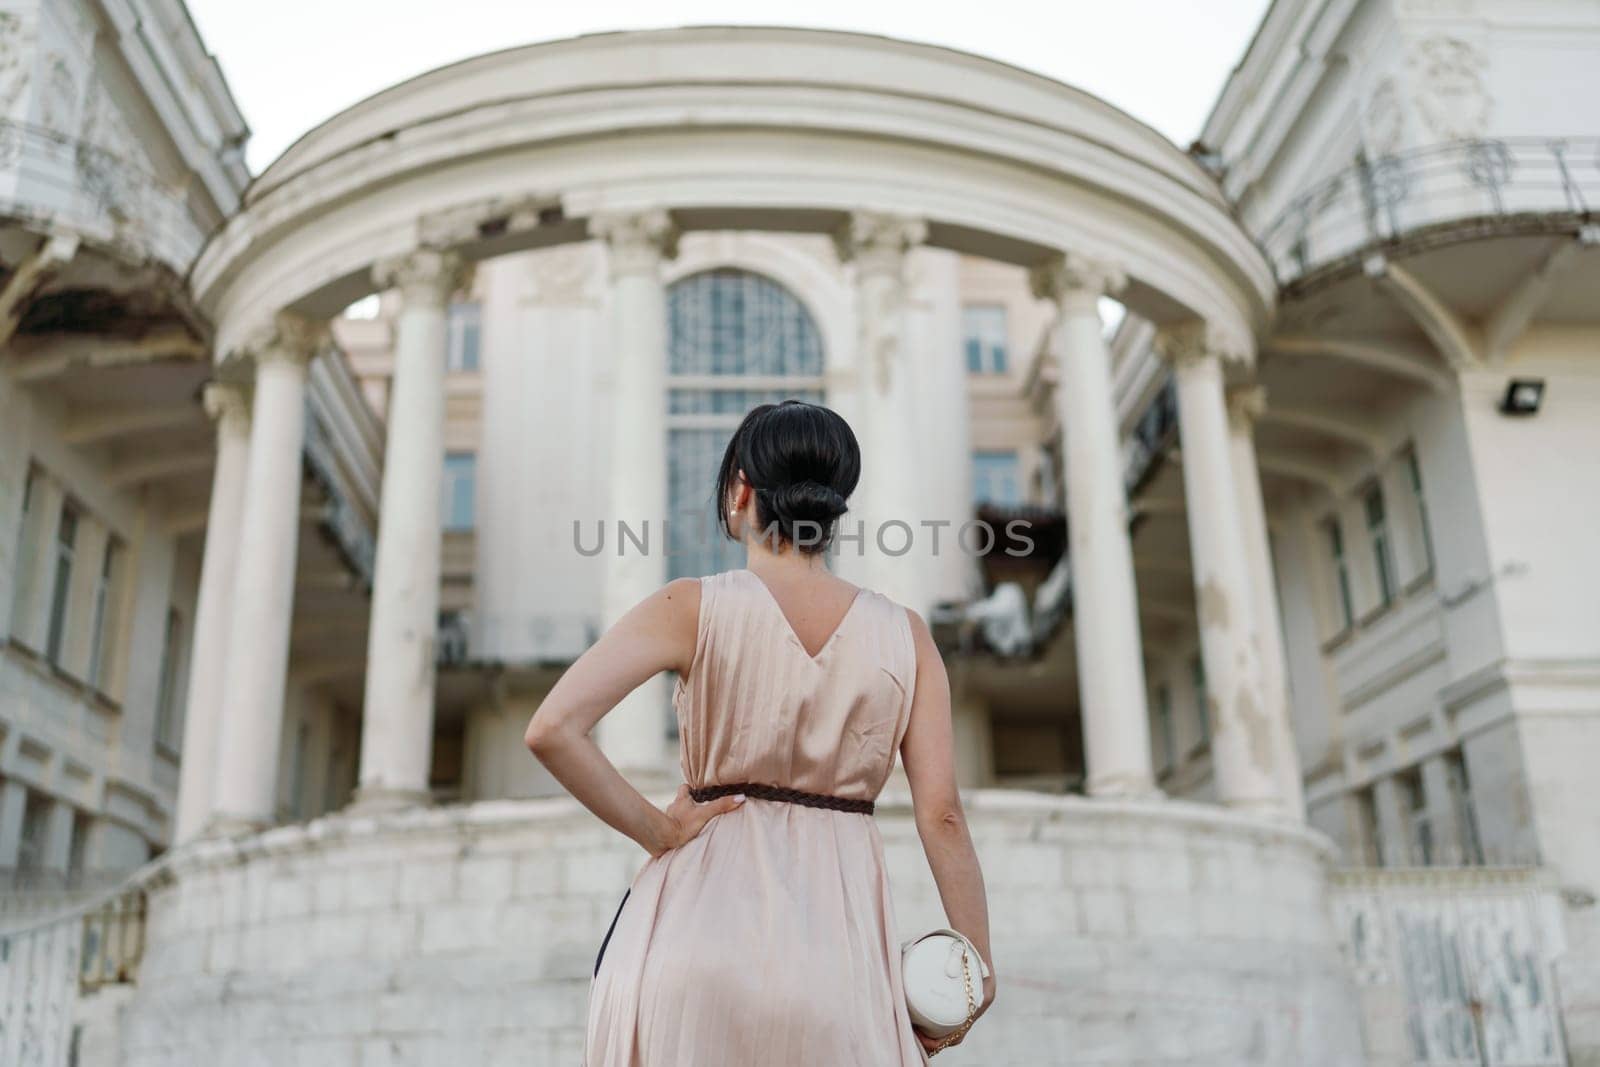 A woman in a pink dress stands in front of a large building. She is looking at the camera with a serious expression. The building is old and has a grand appearance. The woman's dress is elegant